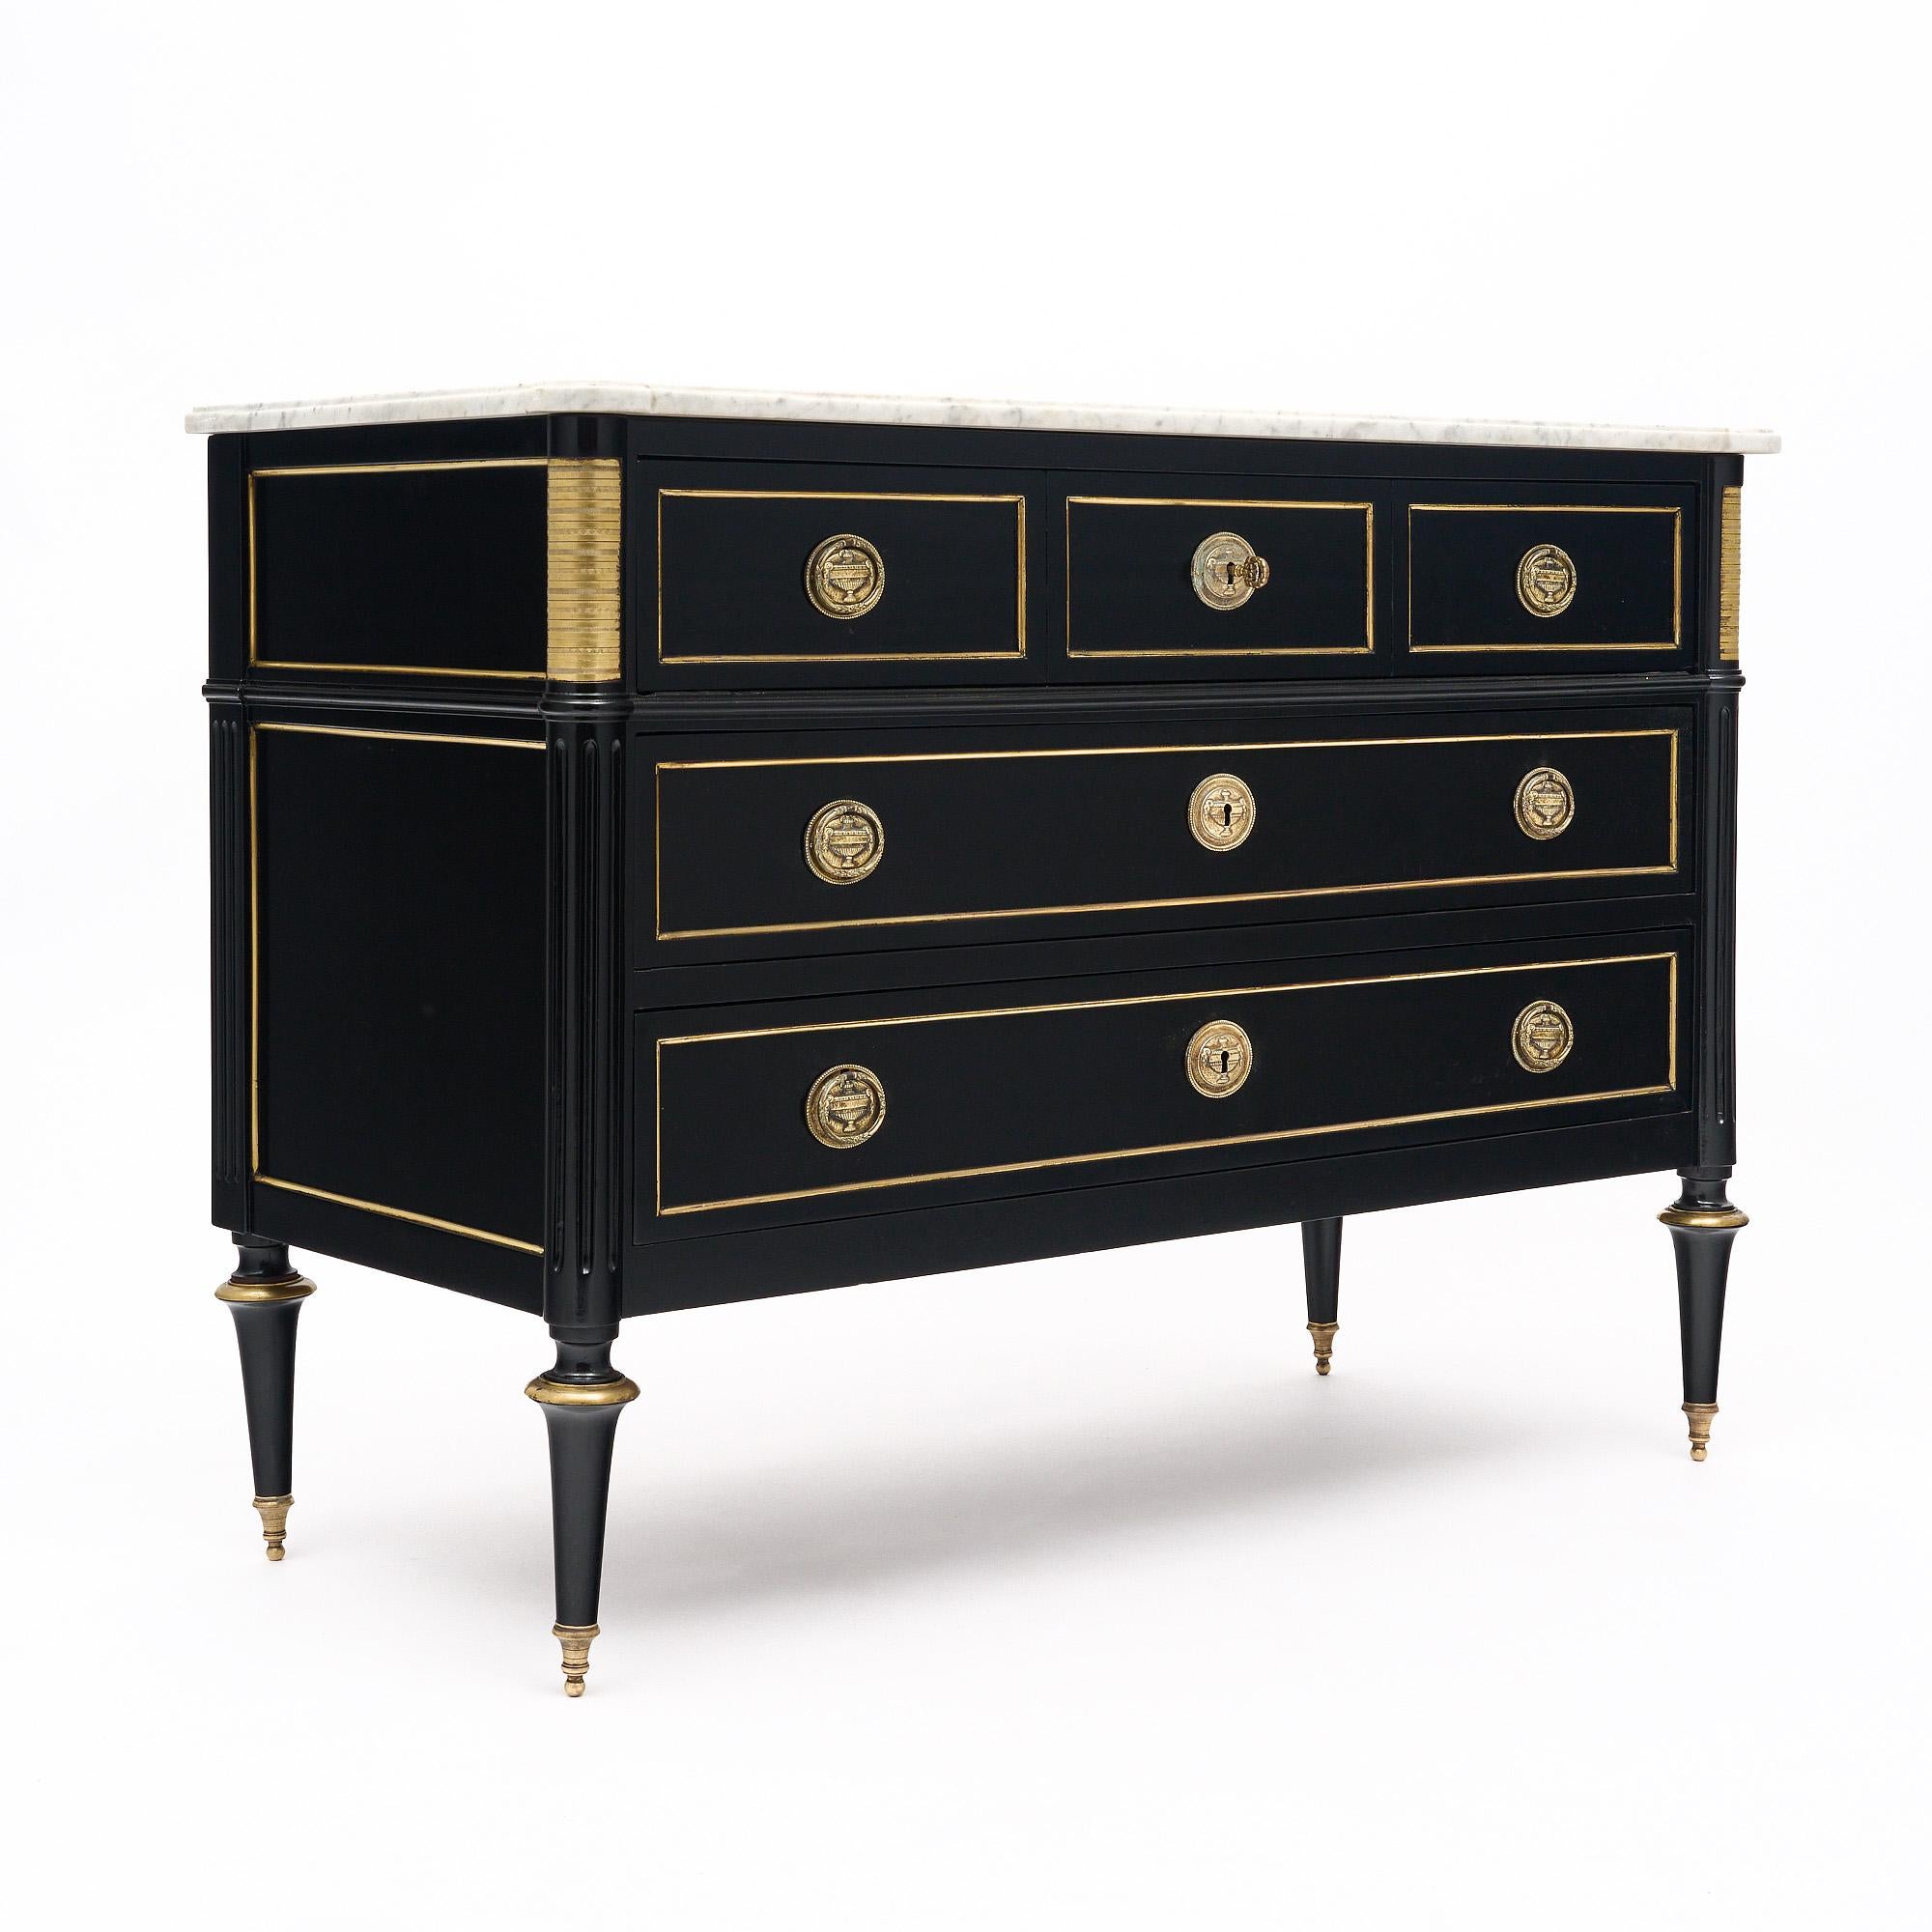 Chest of drawers from France in the Louis XVI style. This 